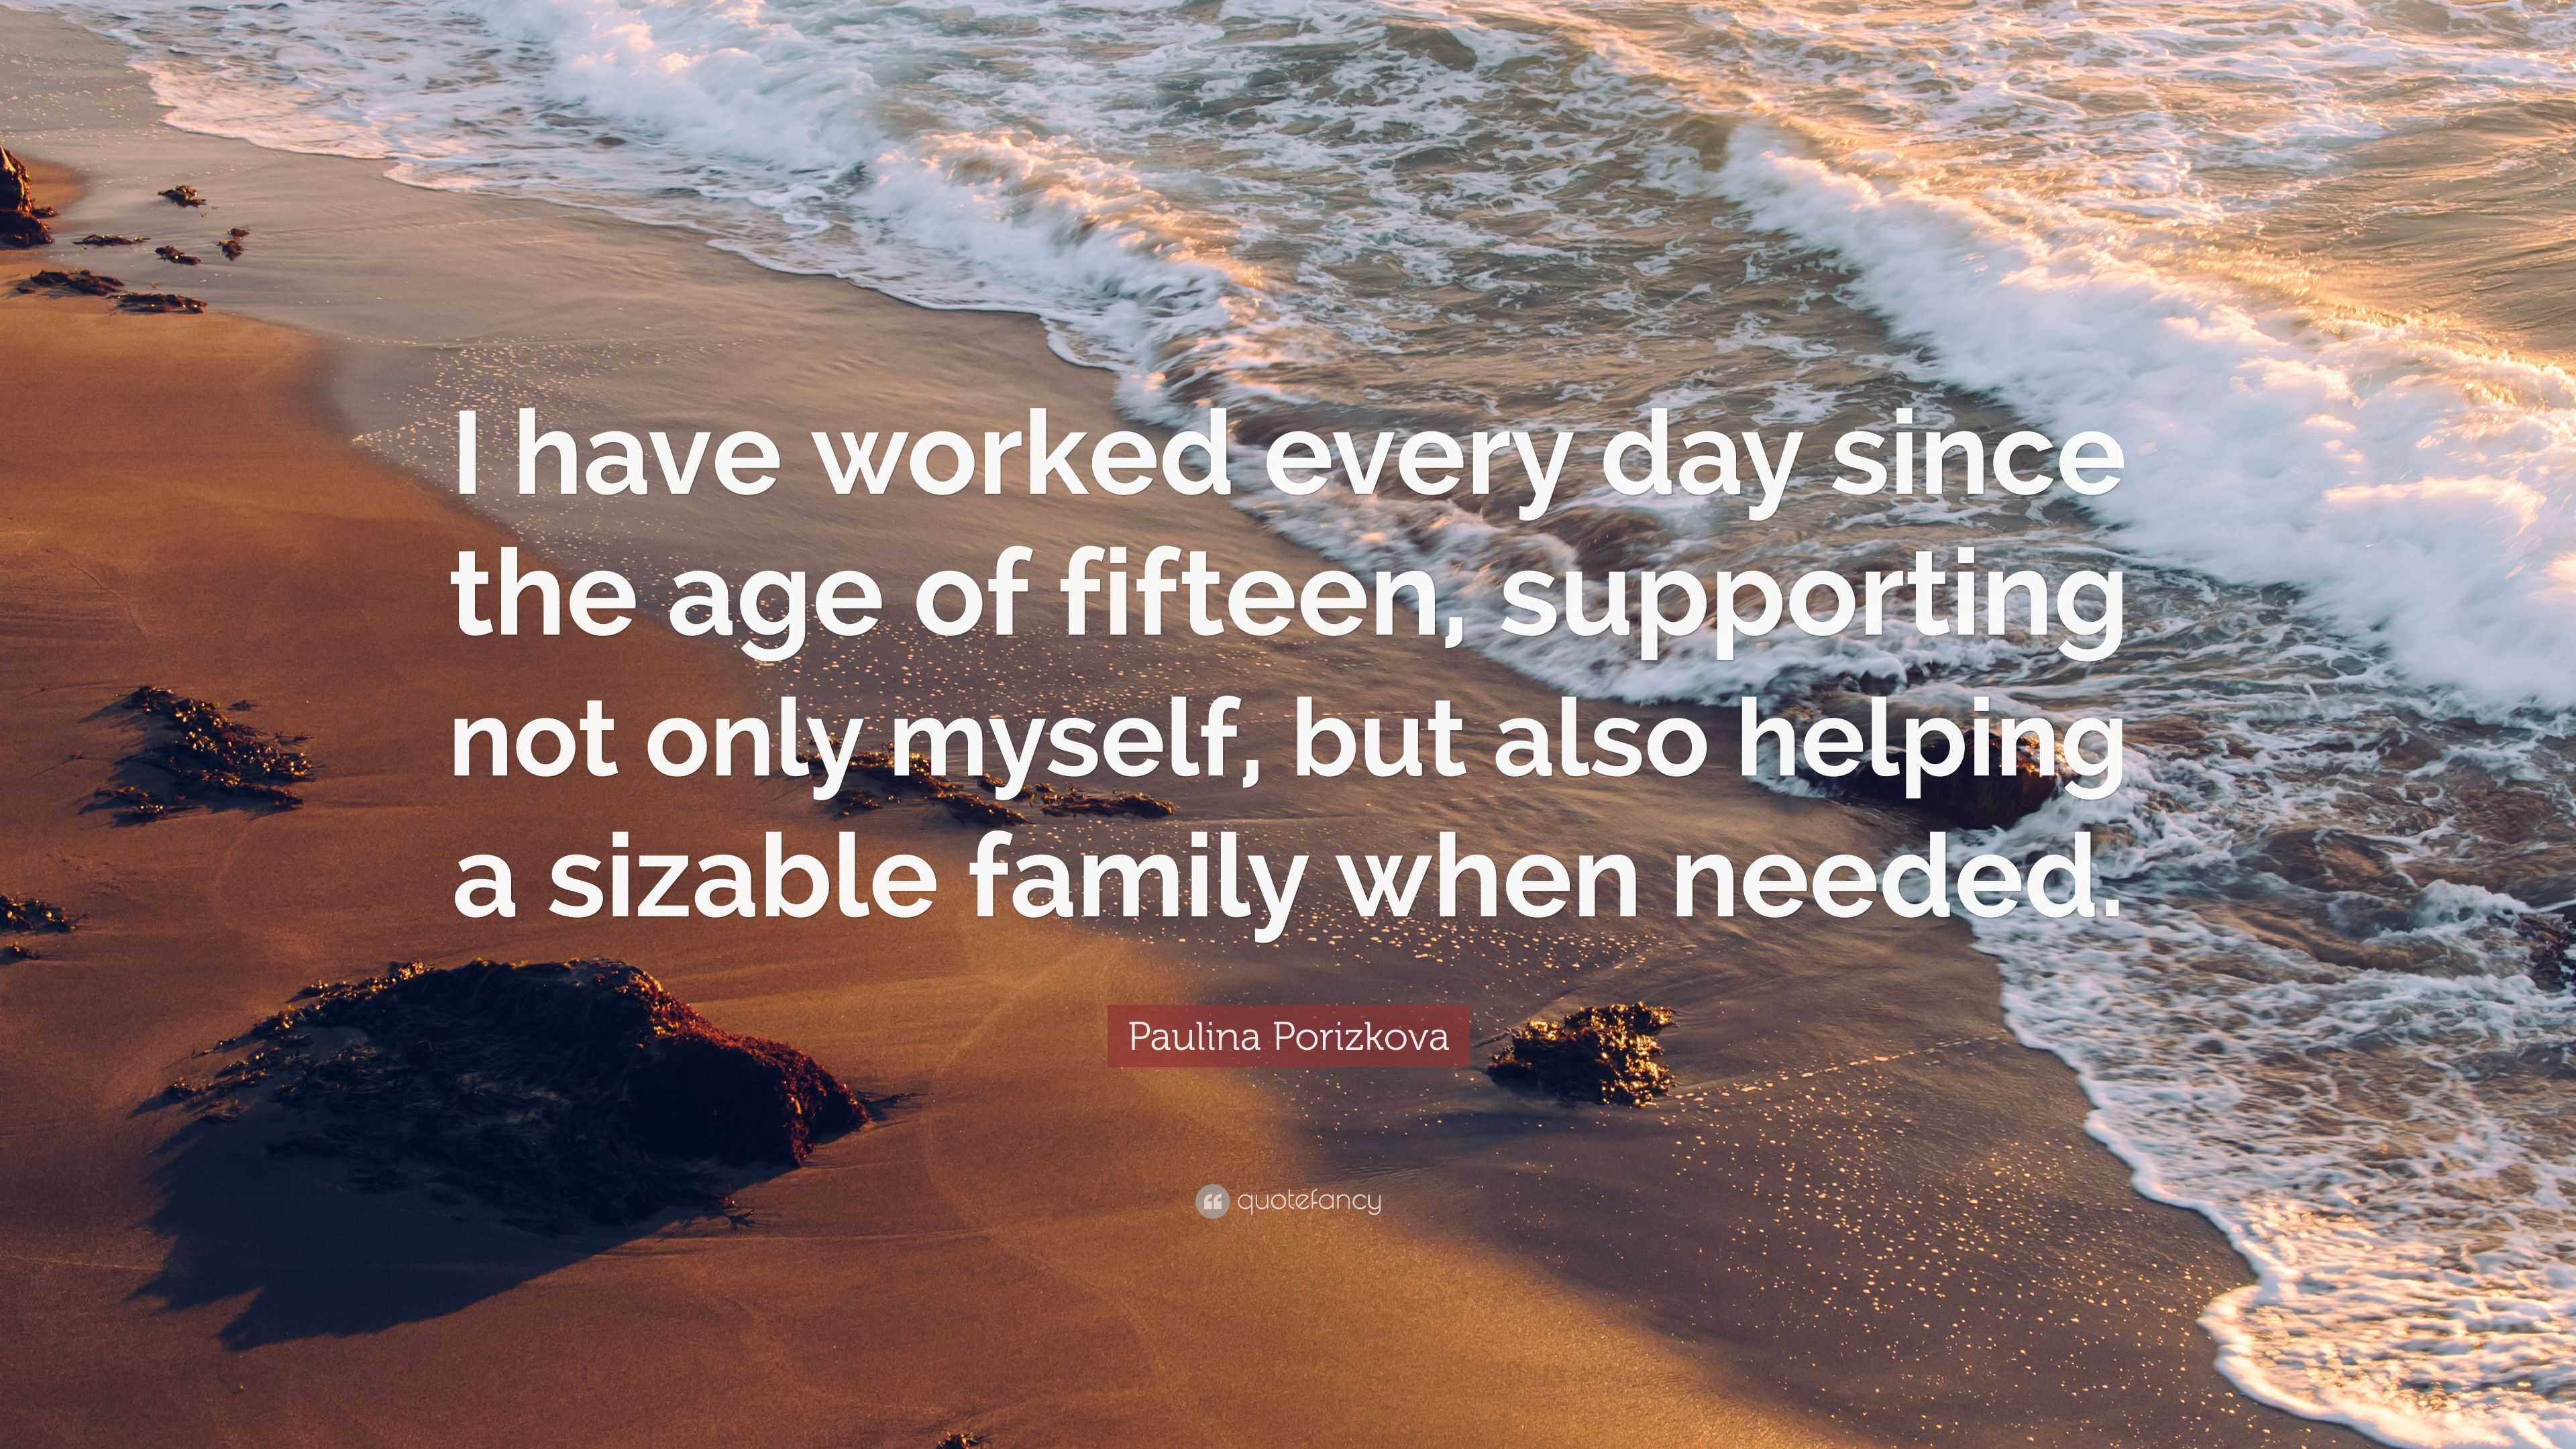 Paulina Porizkova Quote: “I have worked every day since the age of ...